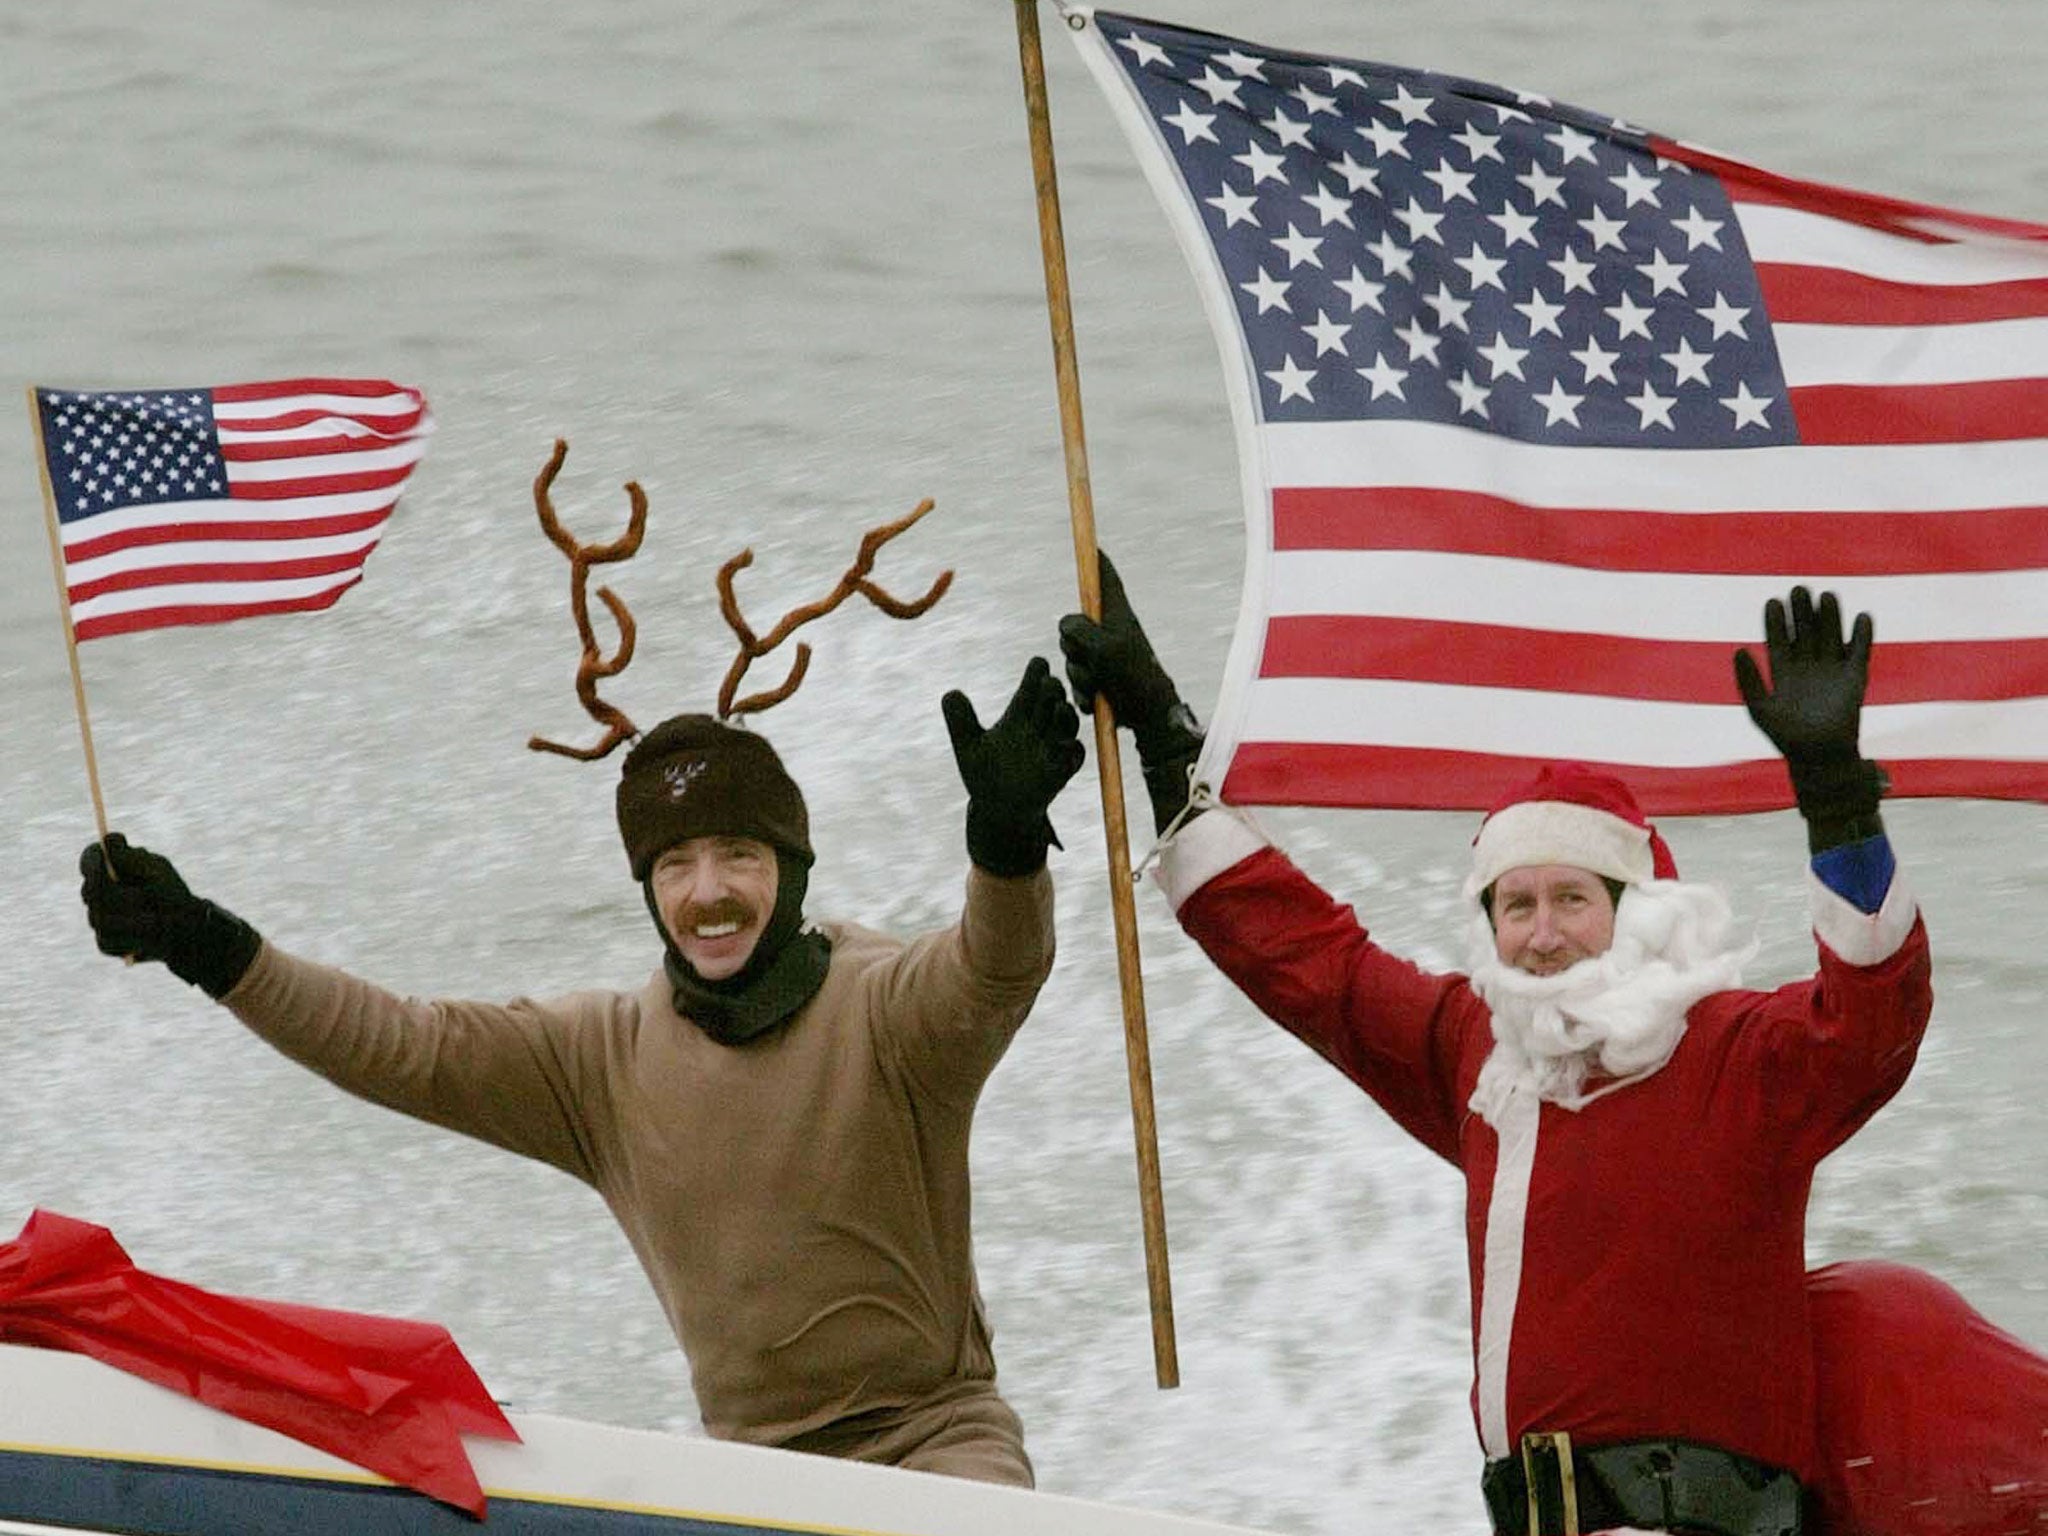 Dressed as Santa Claus, Kerry Nistel (R) holds an American flag after water-skiing along the Potomac River near the Washington Monument December 24, 2003 in Arlington, Virginia.